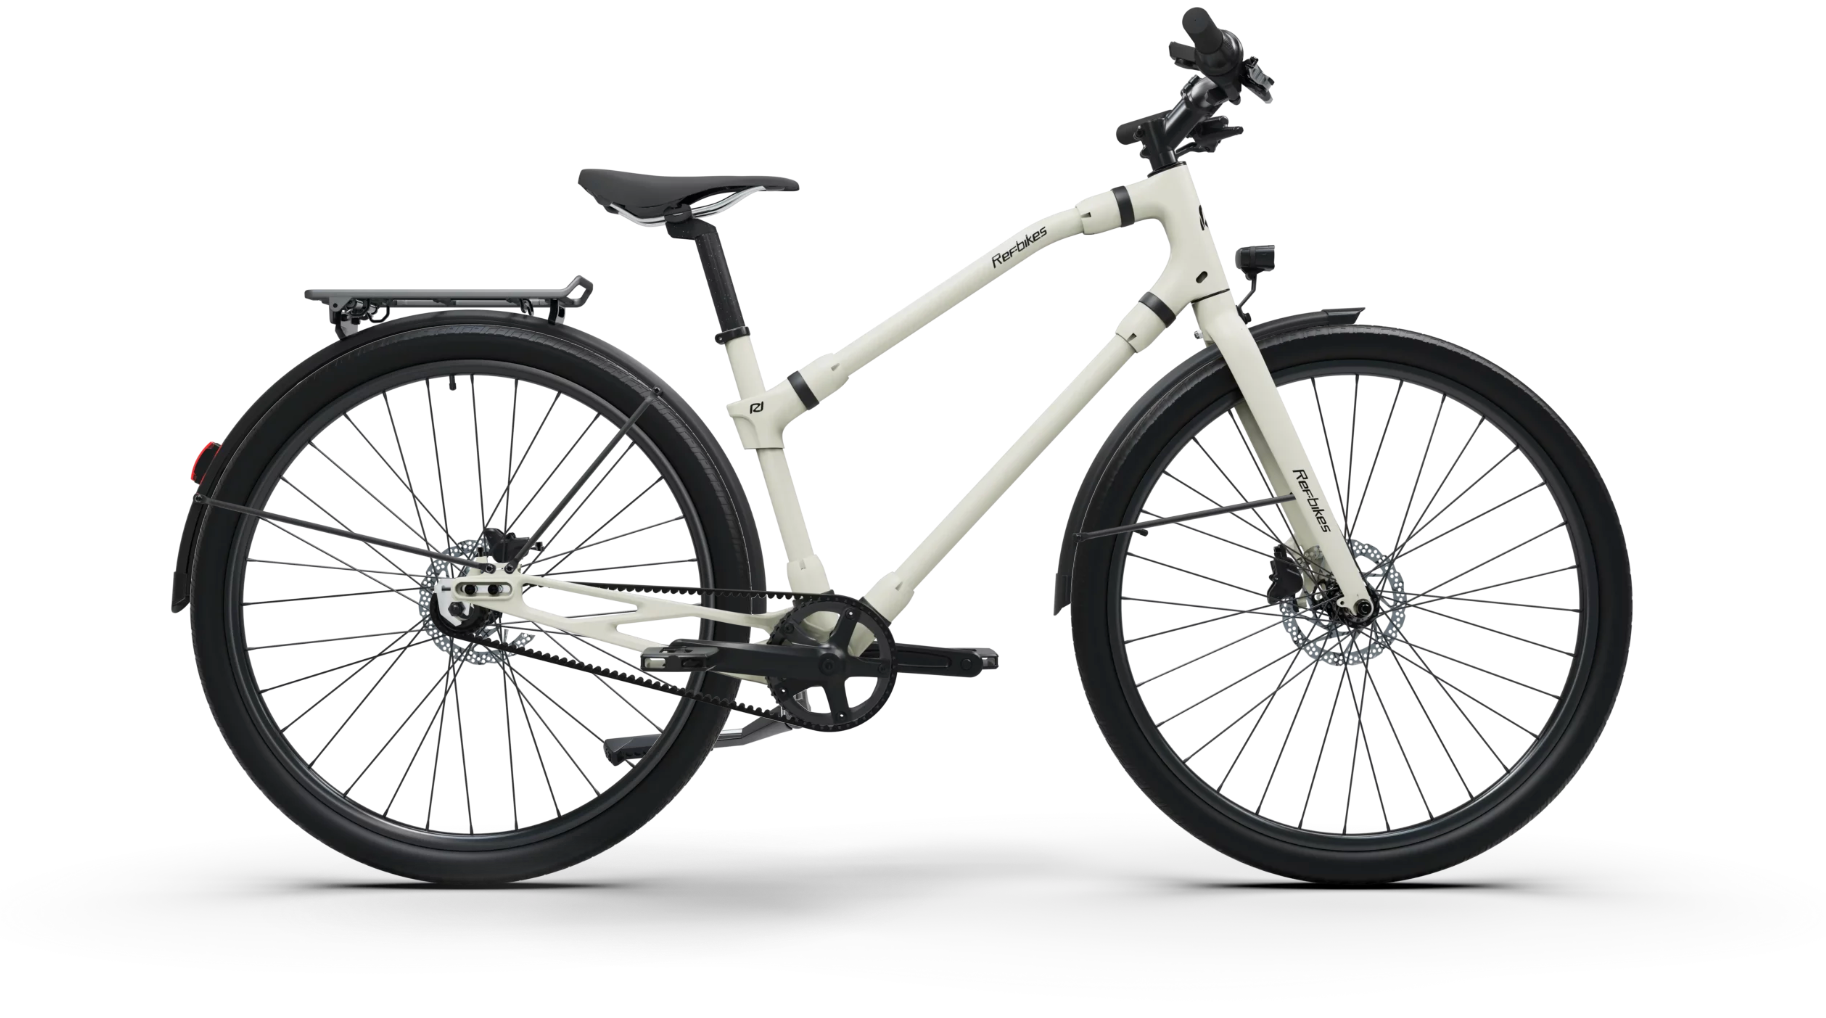 Elegant off-white Ref Urban bicycle, showcasing its minimalist frame and efficient assist system.